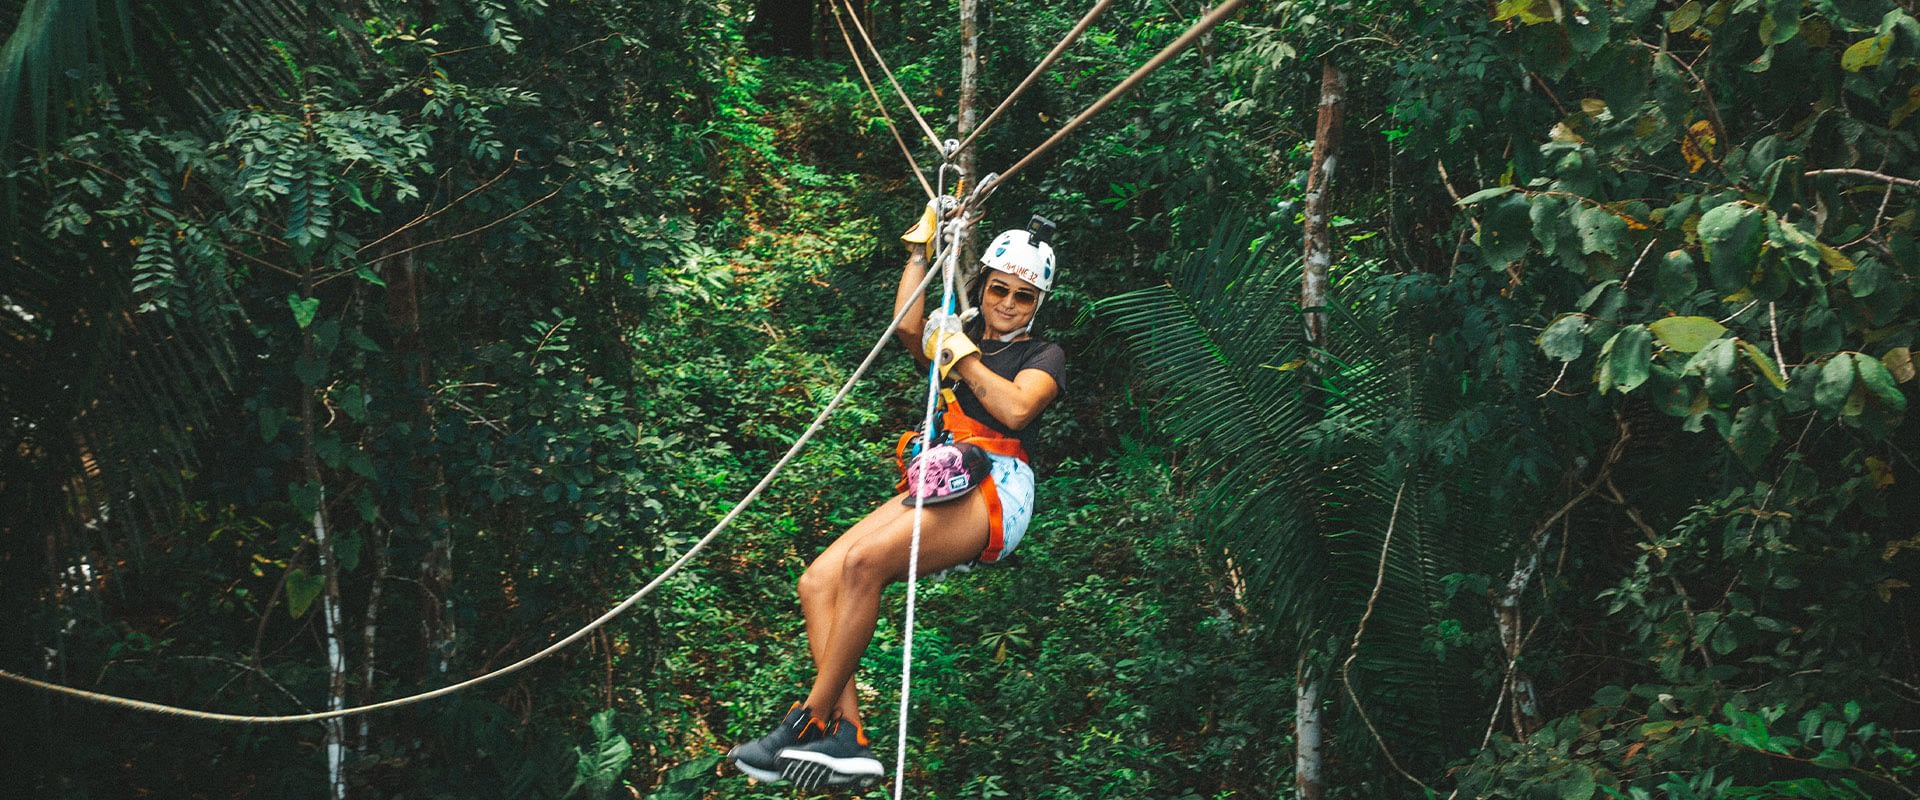 Belize Cave Tubing and Zip Lining Tour